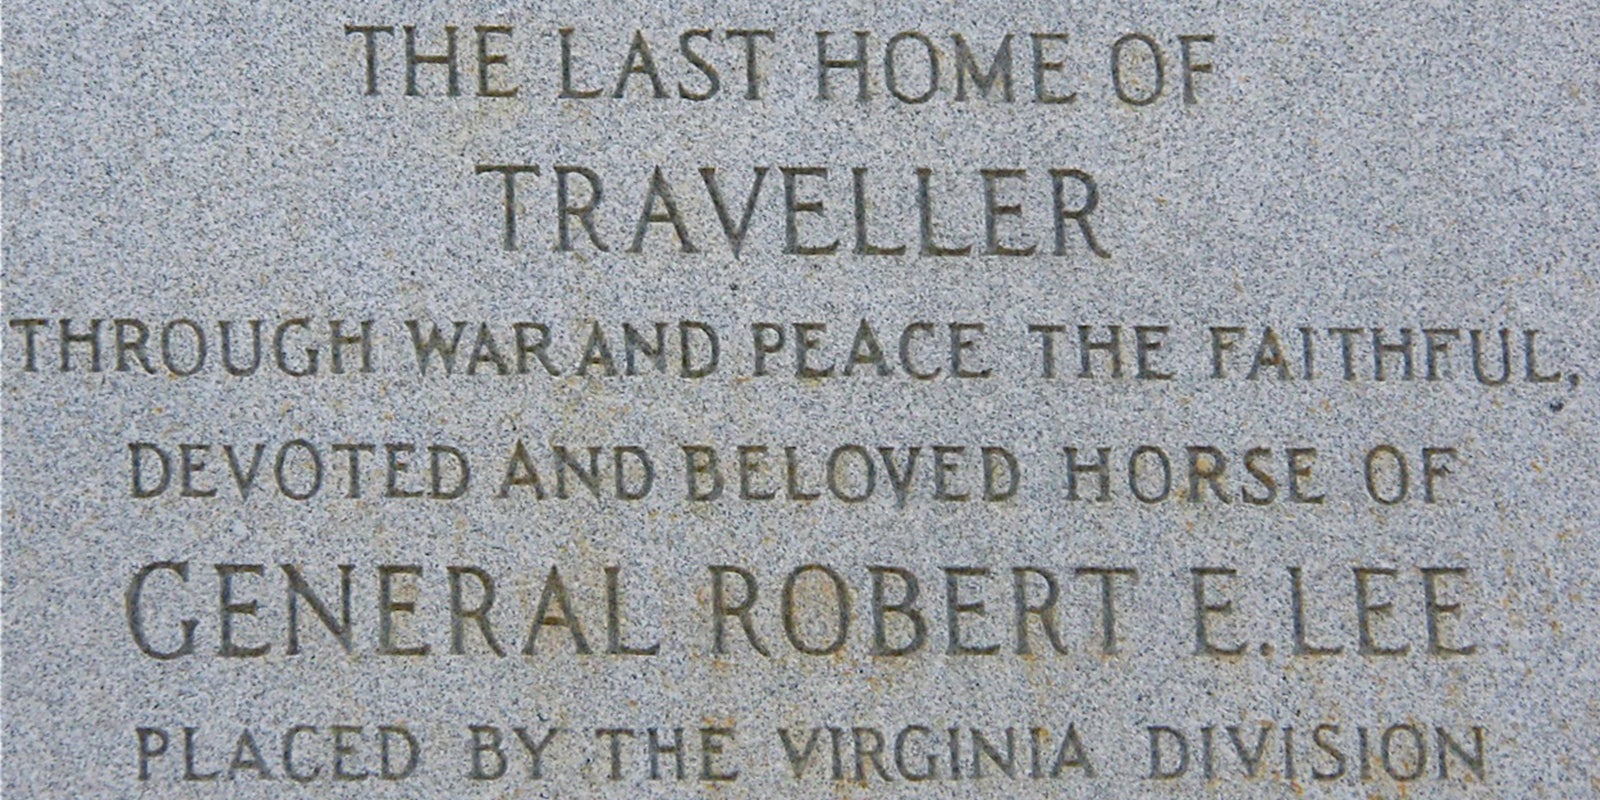 Robert E Lee horse plaque reading 'The last home of Traveller through war and peace the faithful, devoted and beloved horse of General Robert E Lee placed by the Virginia division'